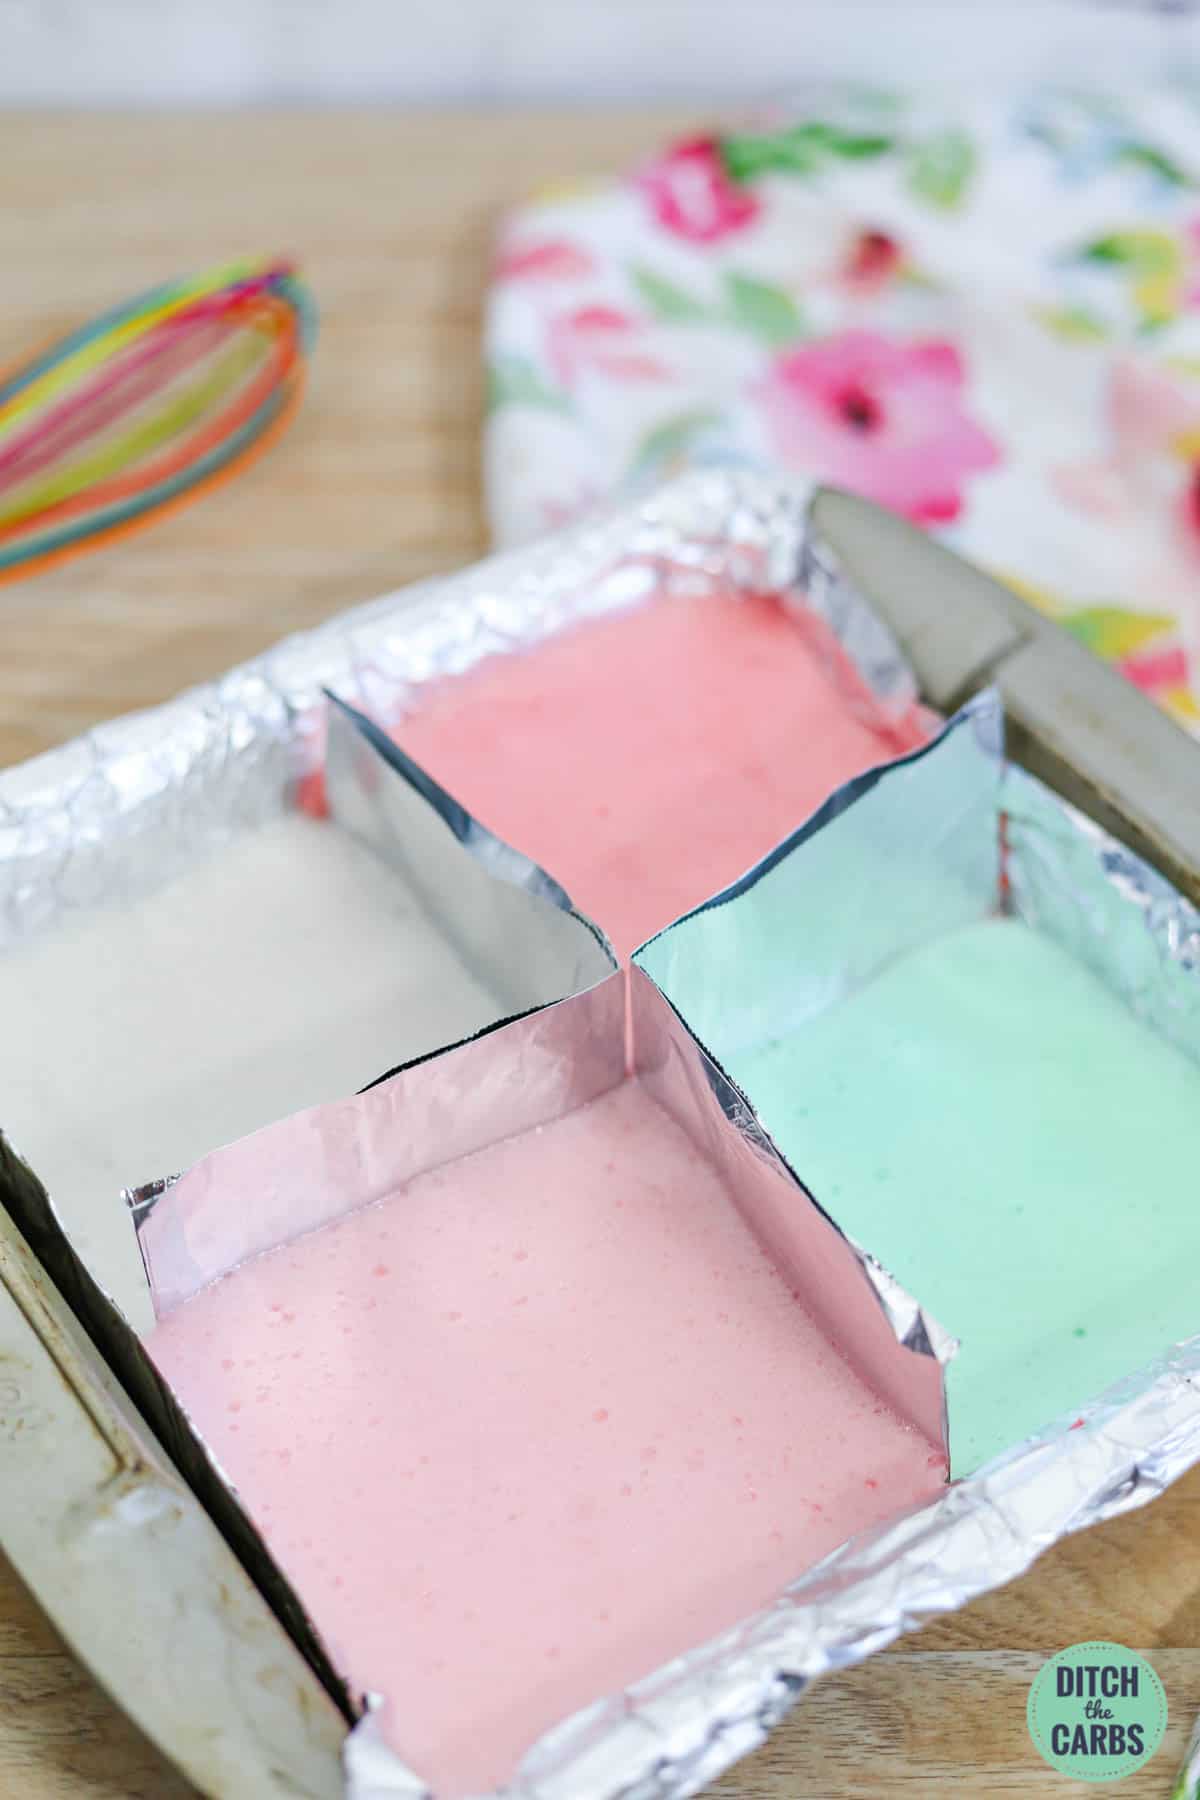 4 colours of sugar-free marshmallows